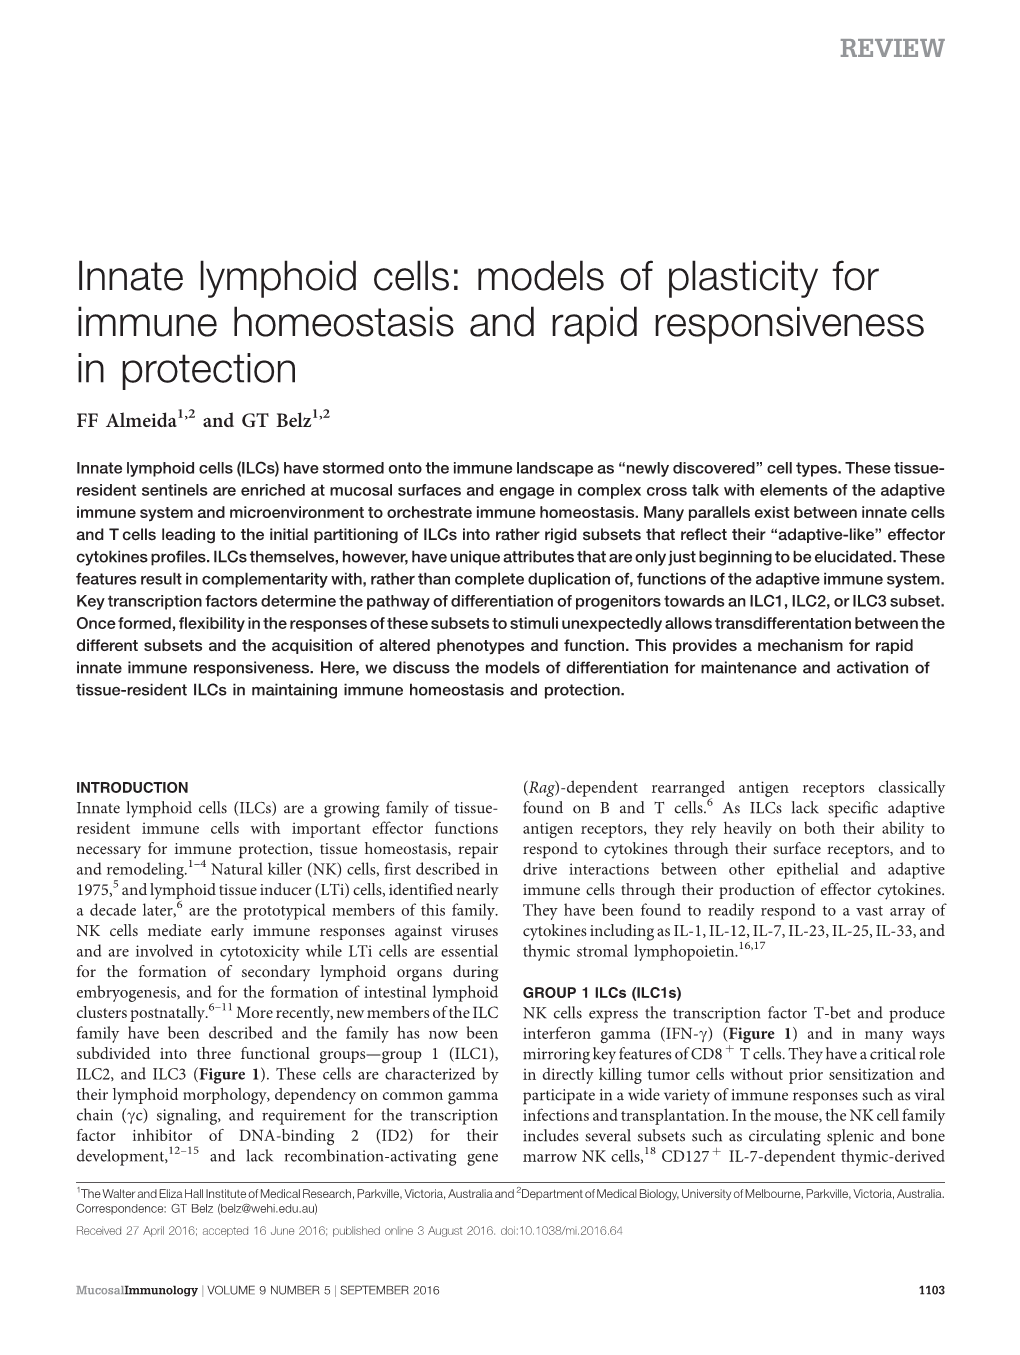 Innate Lymphoid Cells: Models of Plasticity for Immune Homeostasis and Rapid Responsiveness in Protection